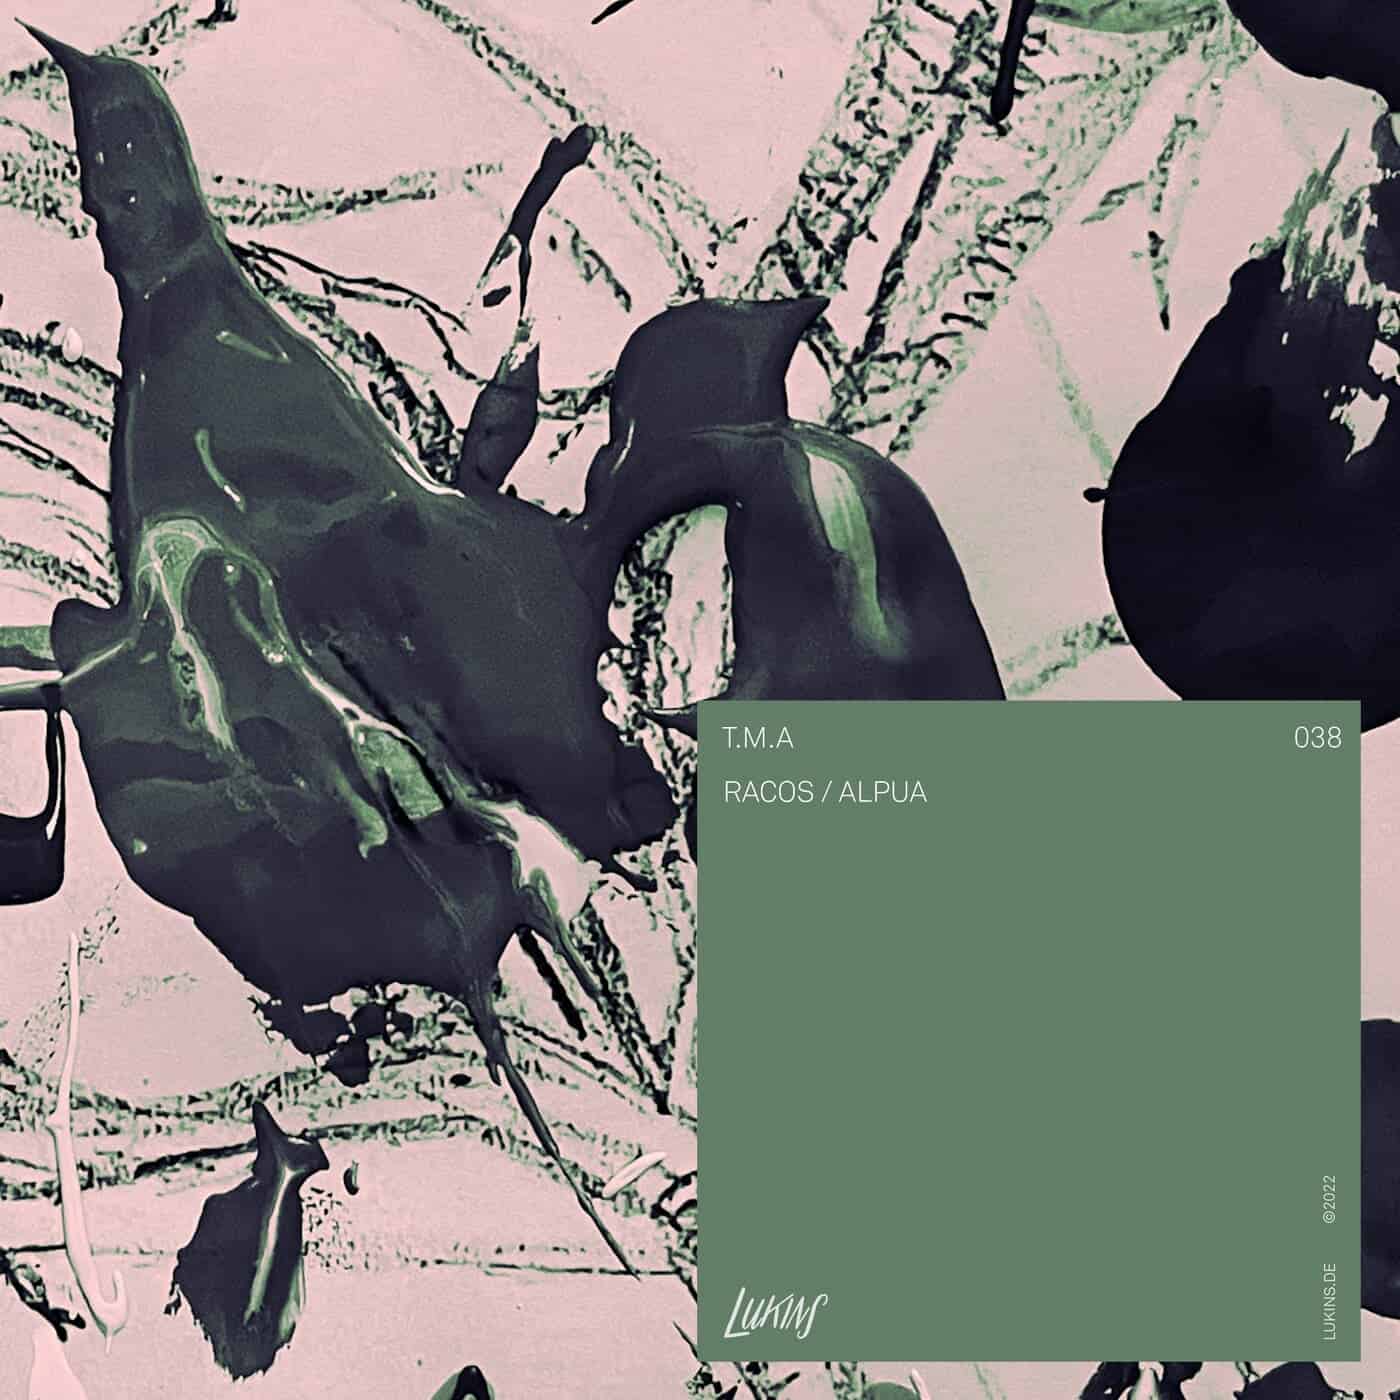 Download T.M.A, Corpino, Theo Meier - Racos / Alpua on Electrobuzz